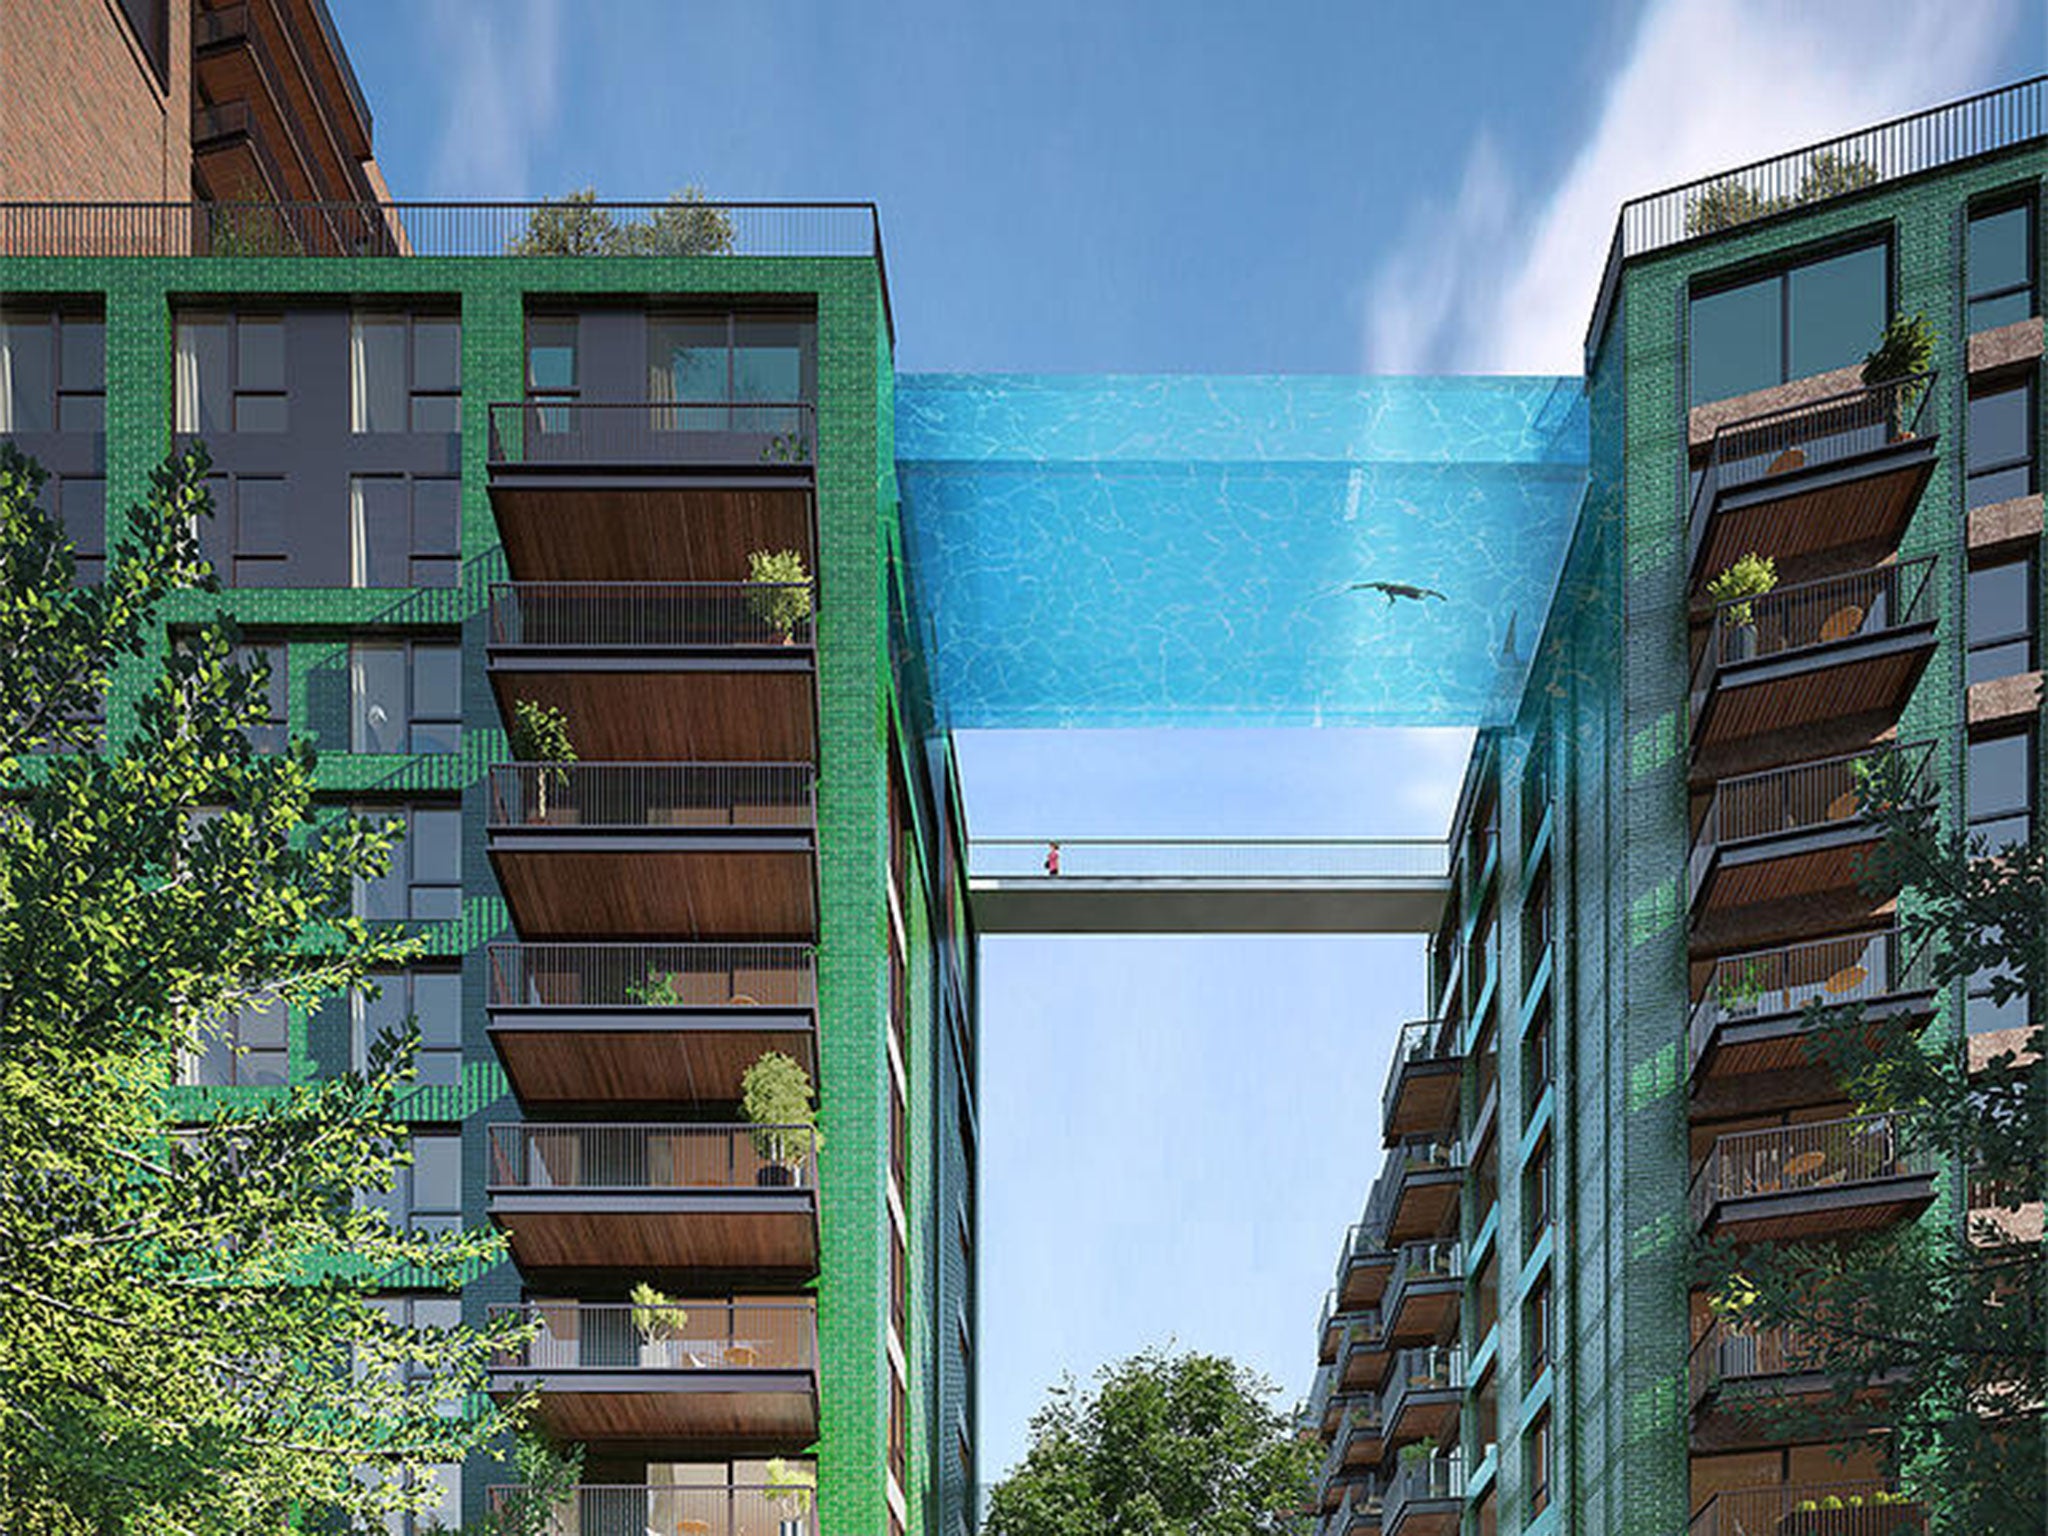 The design for the pool at Embassy Gardens, Nine Elms